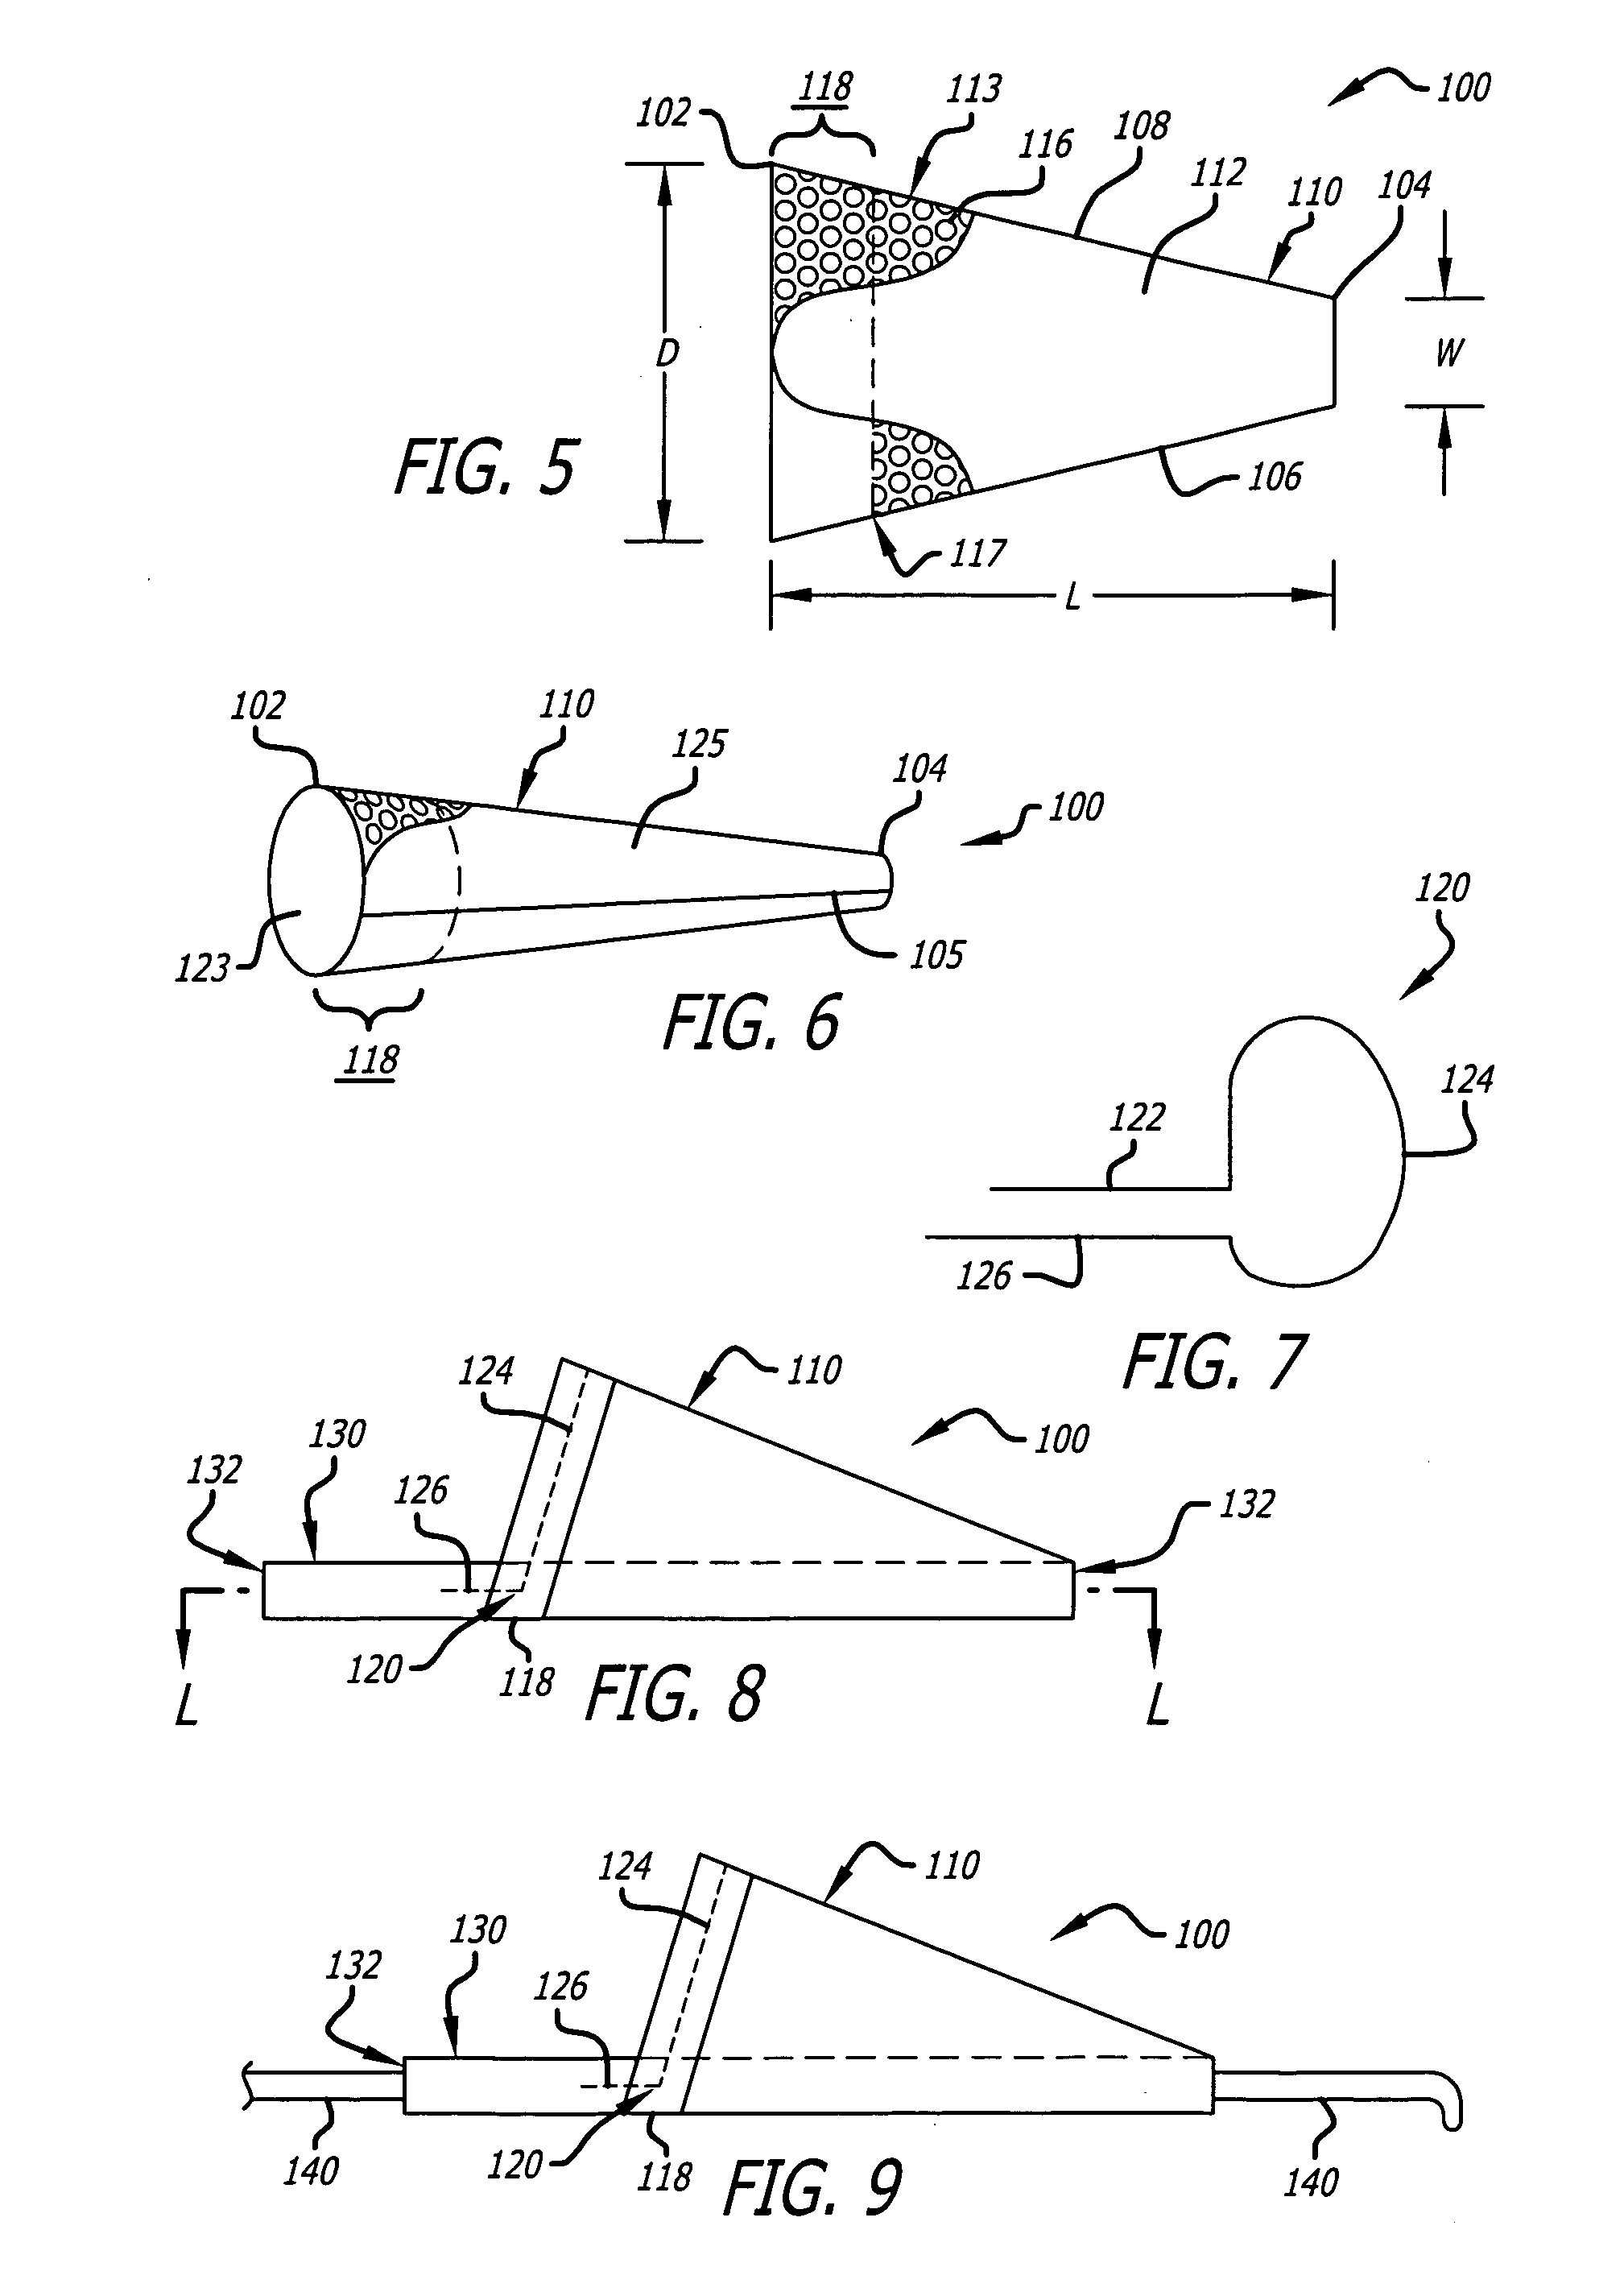 Embolic filter device and related systems and methods